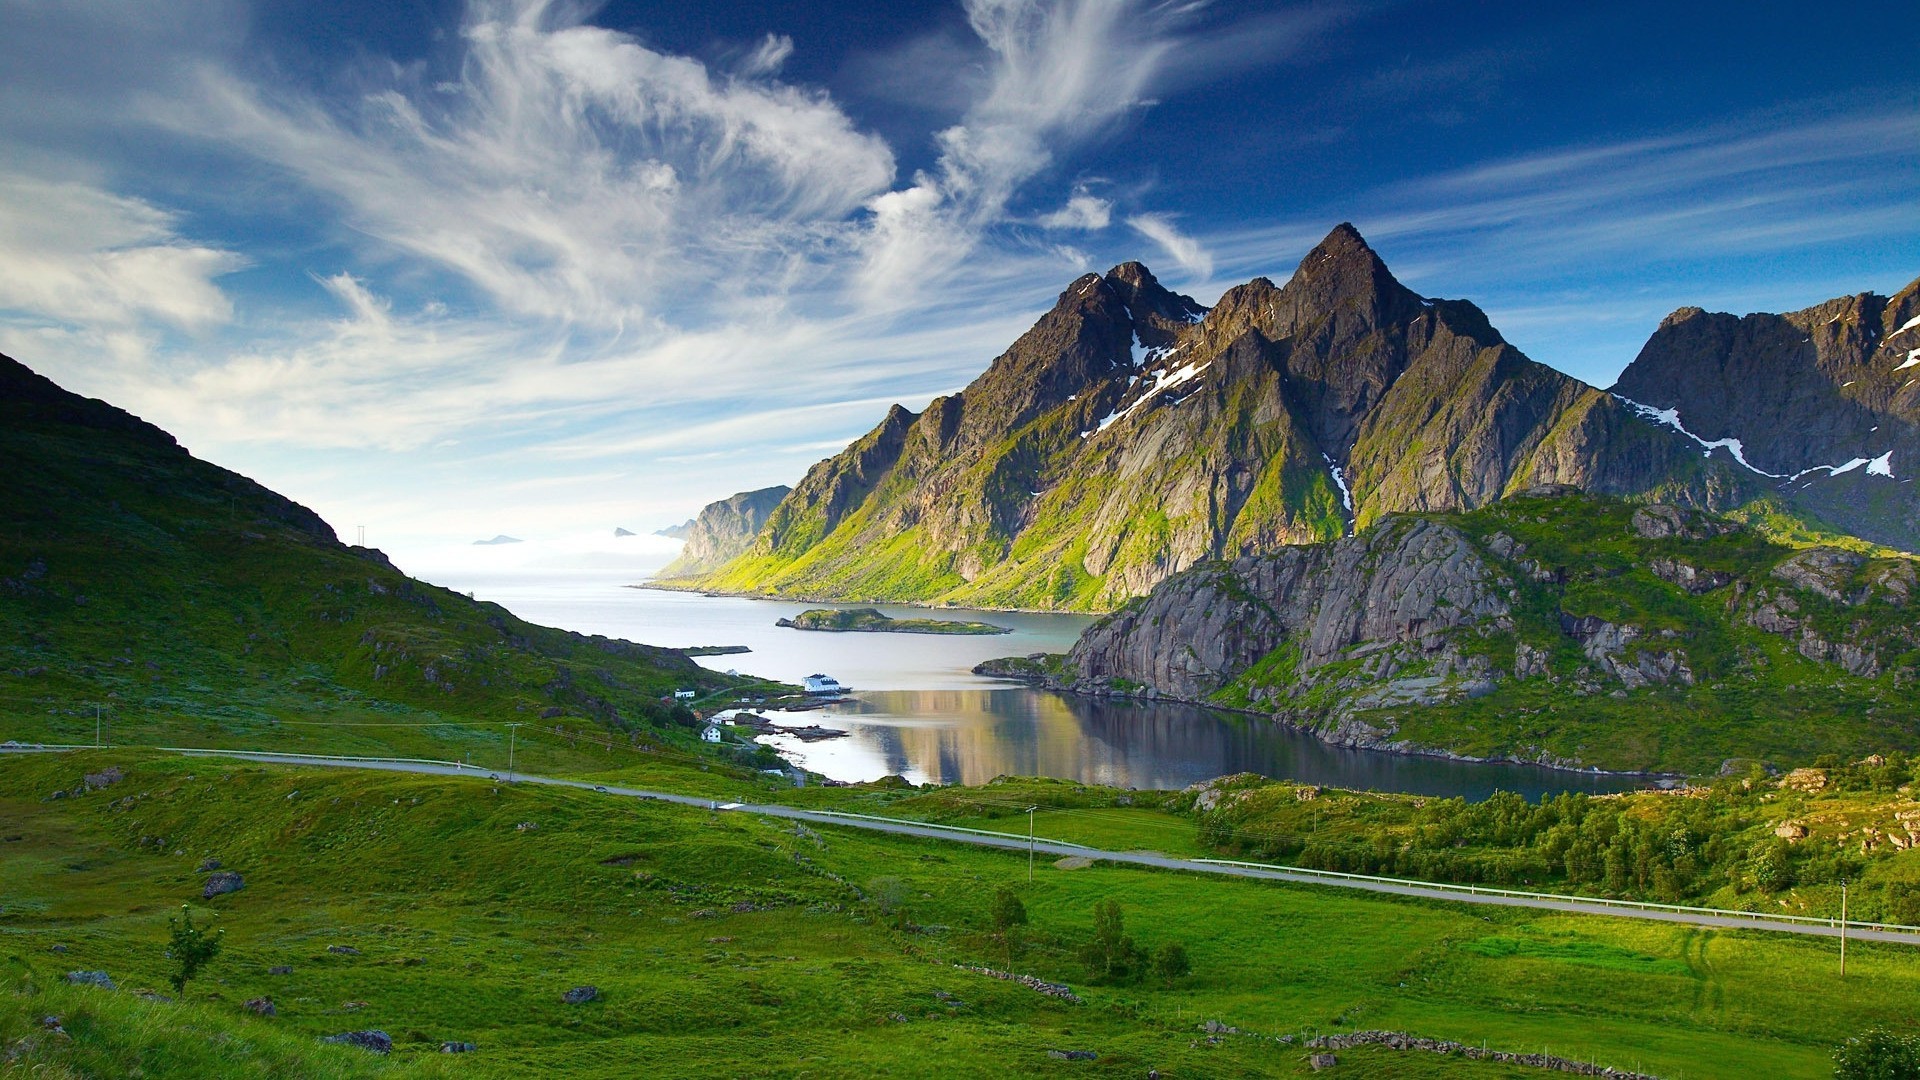 1920x1080 Green mountains and lake in norway widescreen high resolution wallpaper.